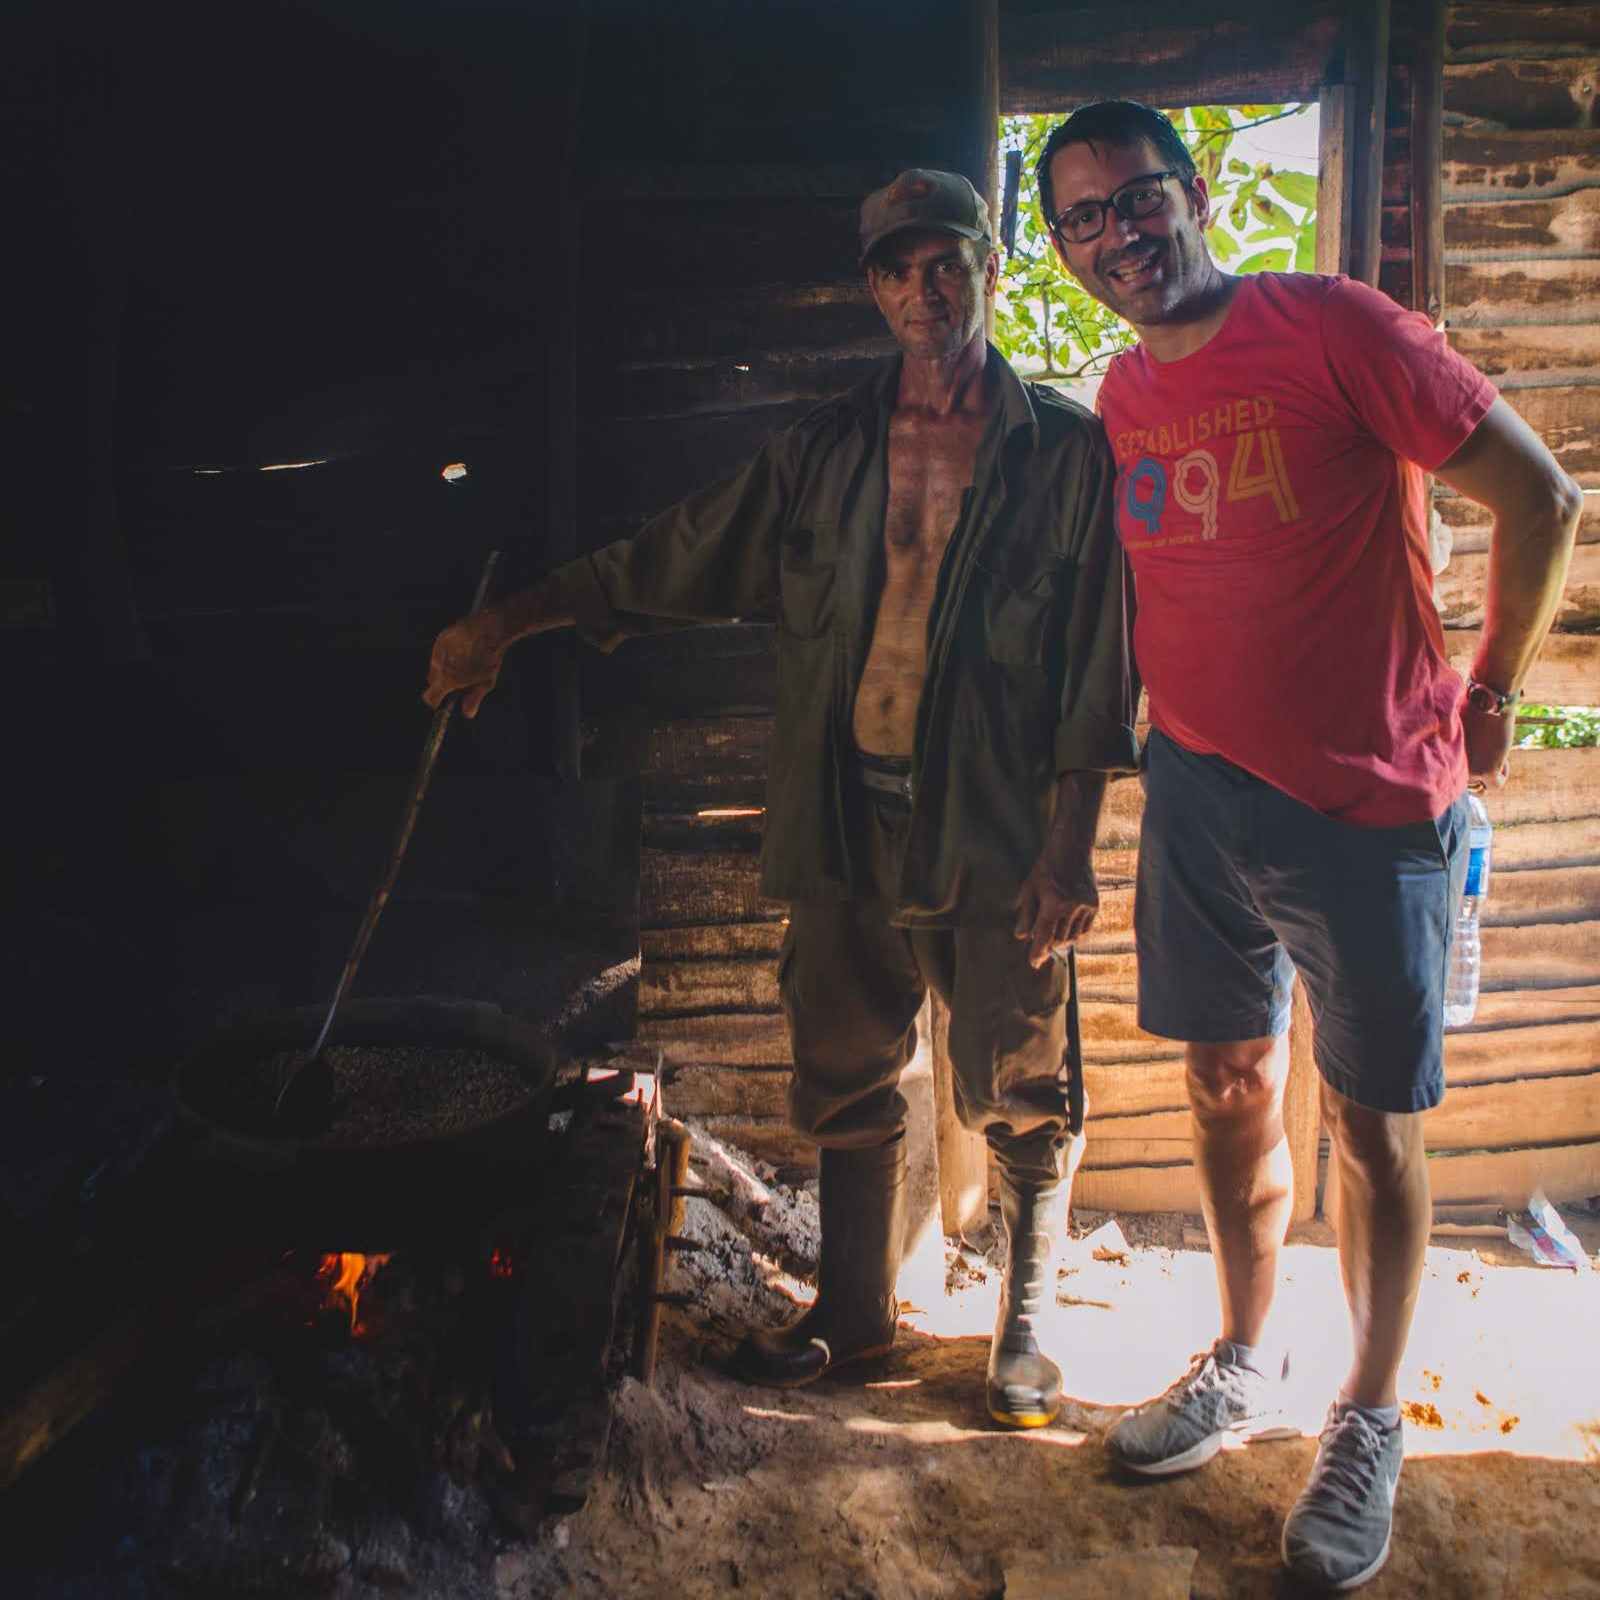 Gardner Tours Custom Cuba Tours Man poses with a Cuban Coffee Farmer as they roast coffee over and open fire in a hut